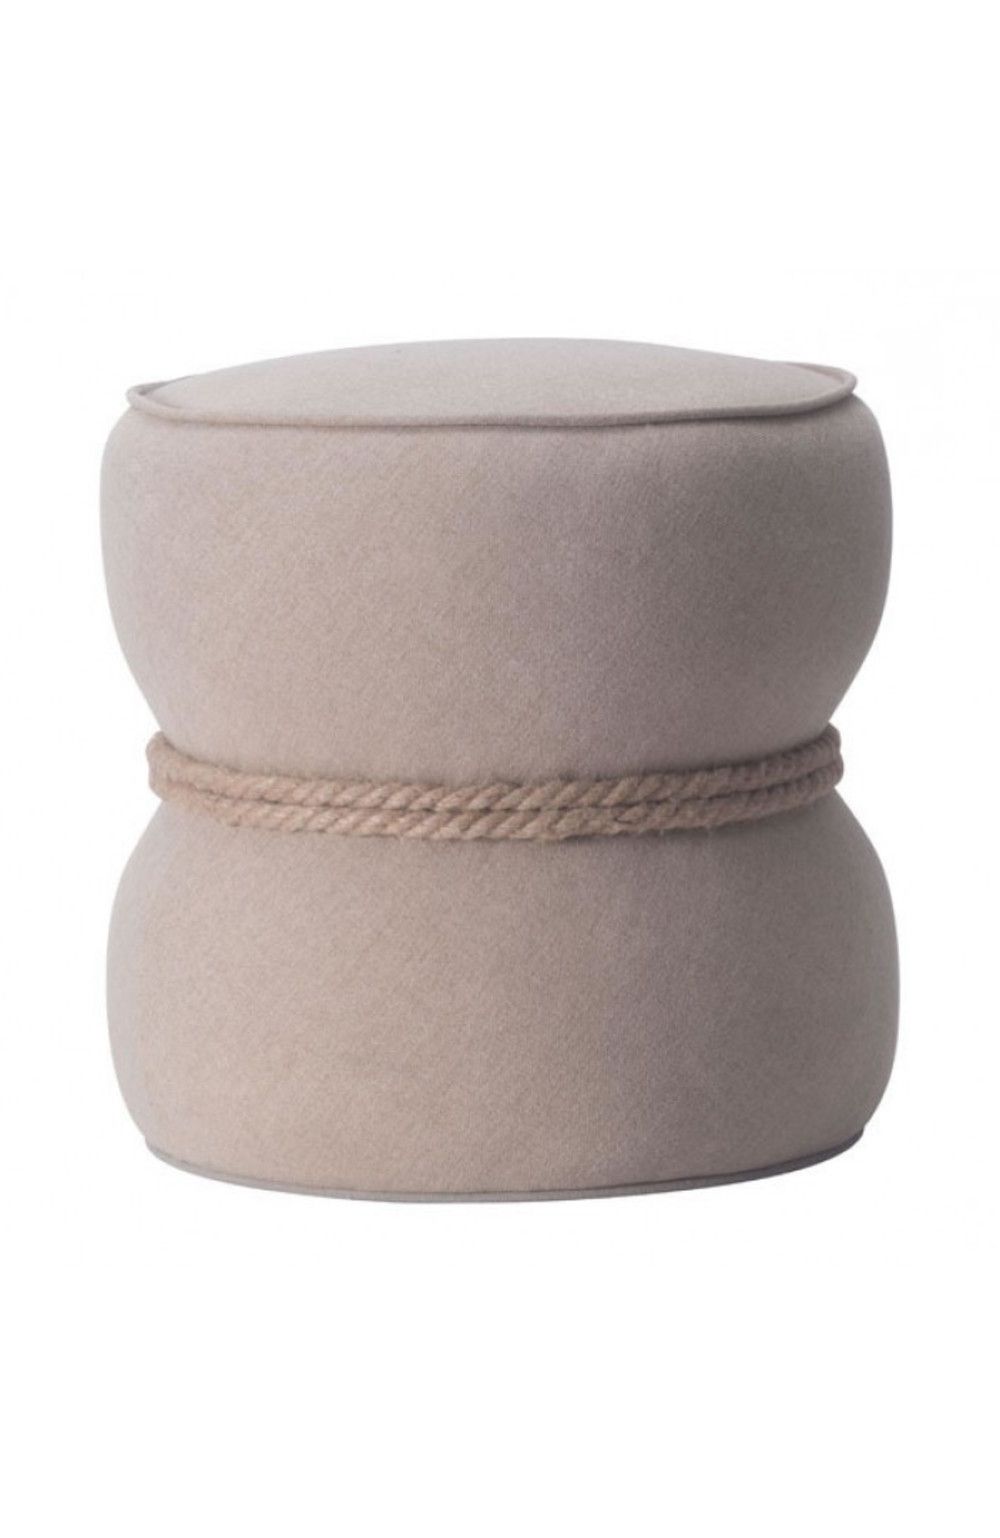 Furnitureland South For Orange Fabric Round Modern Ottomans With Rope Trim (View 5 of 10)